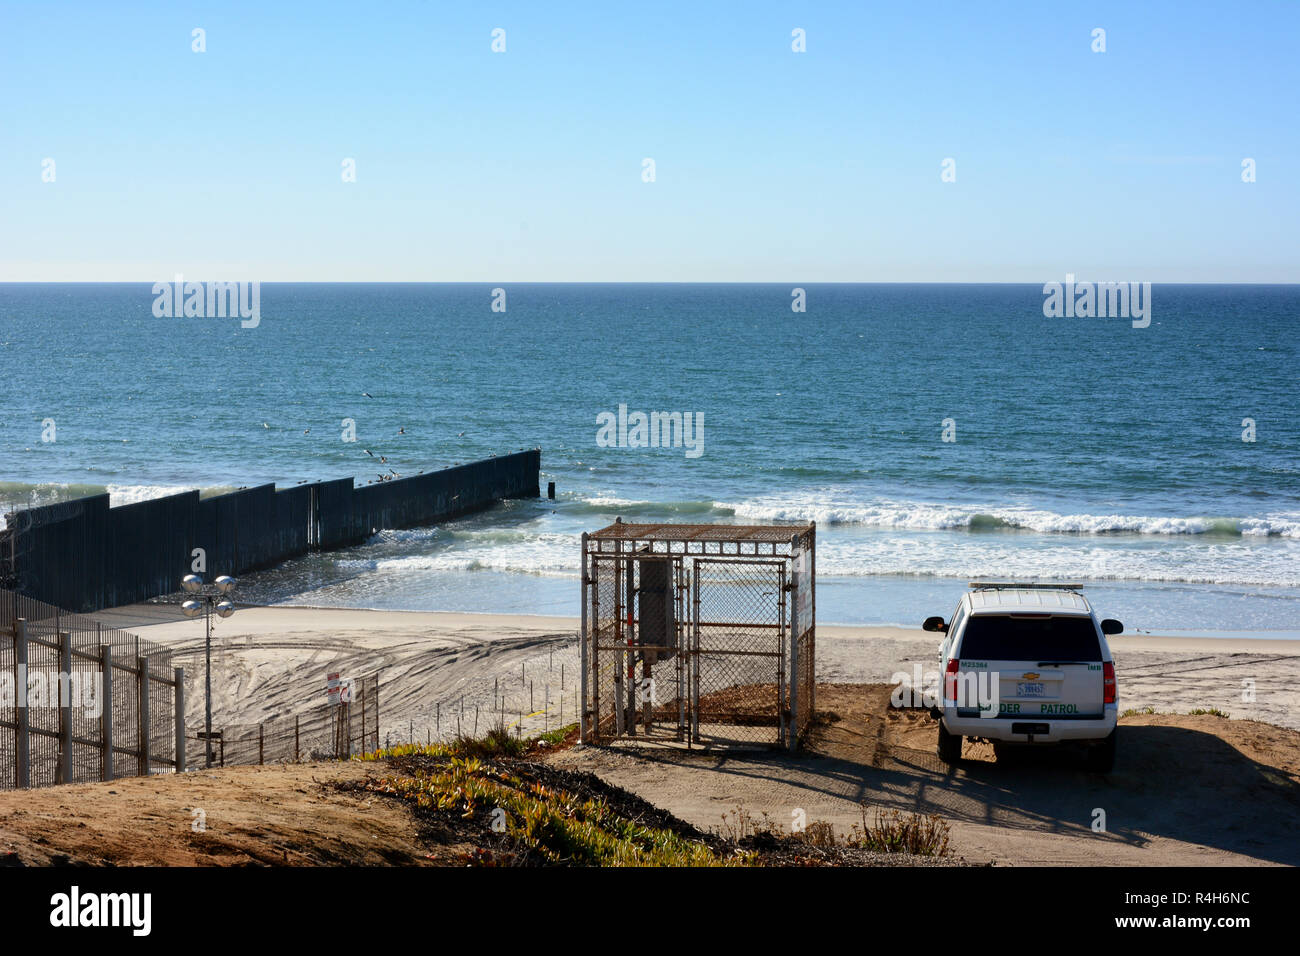 SAN YSIDRO, CALIFORNIA - NOVEMBER 26, 2018: A Border Patrol Vehicle watches over the beach and border wall that extends into the ocean, at Imperial Be Stock Photo